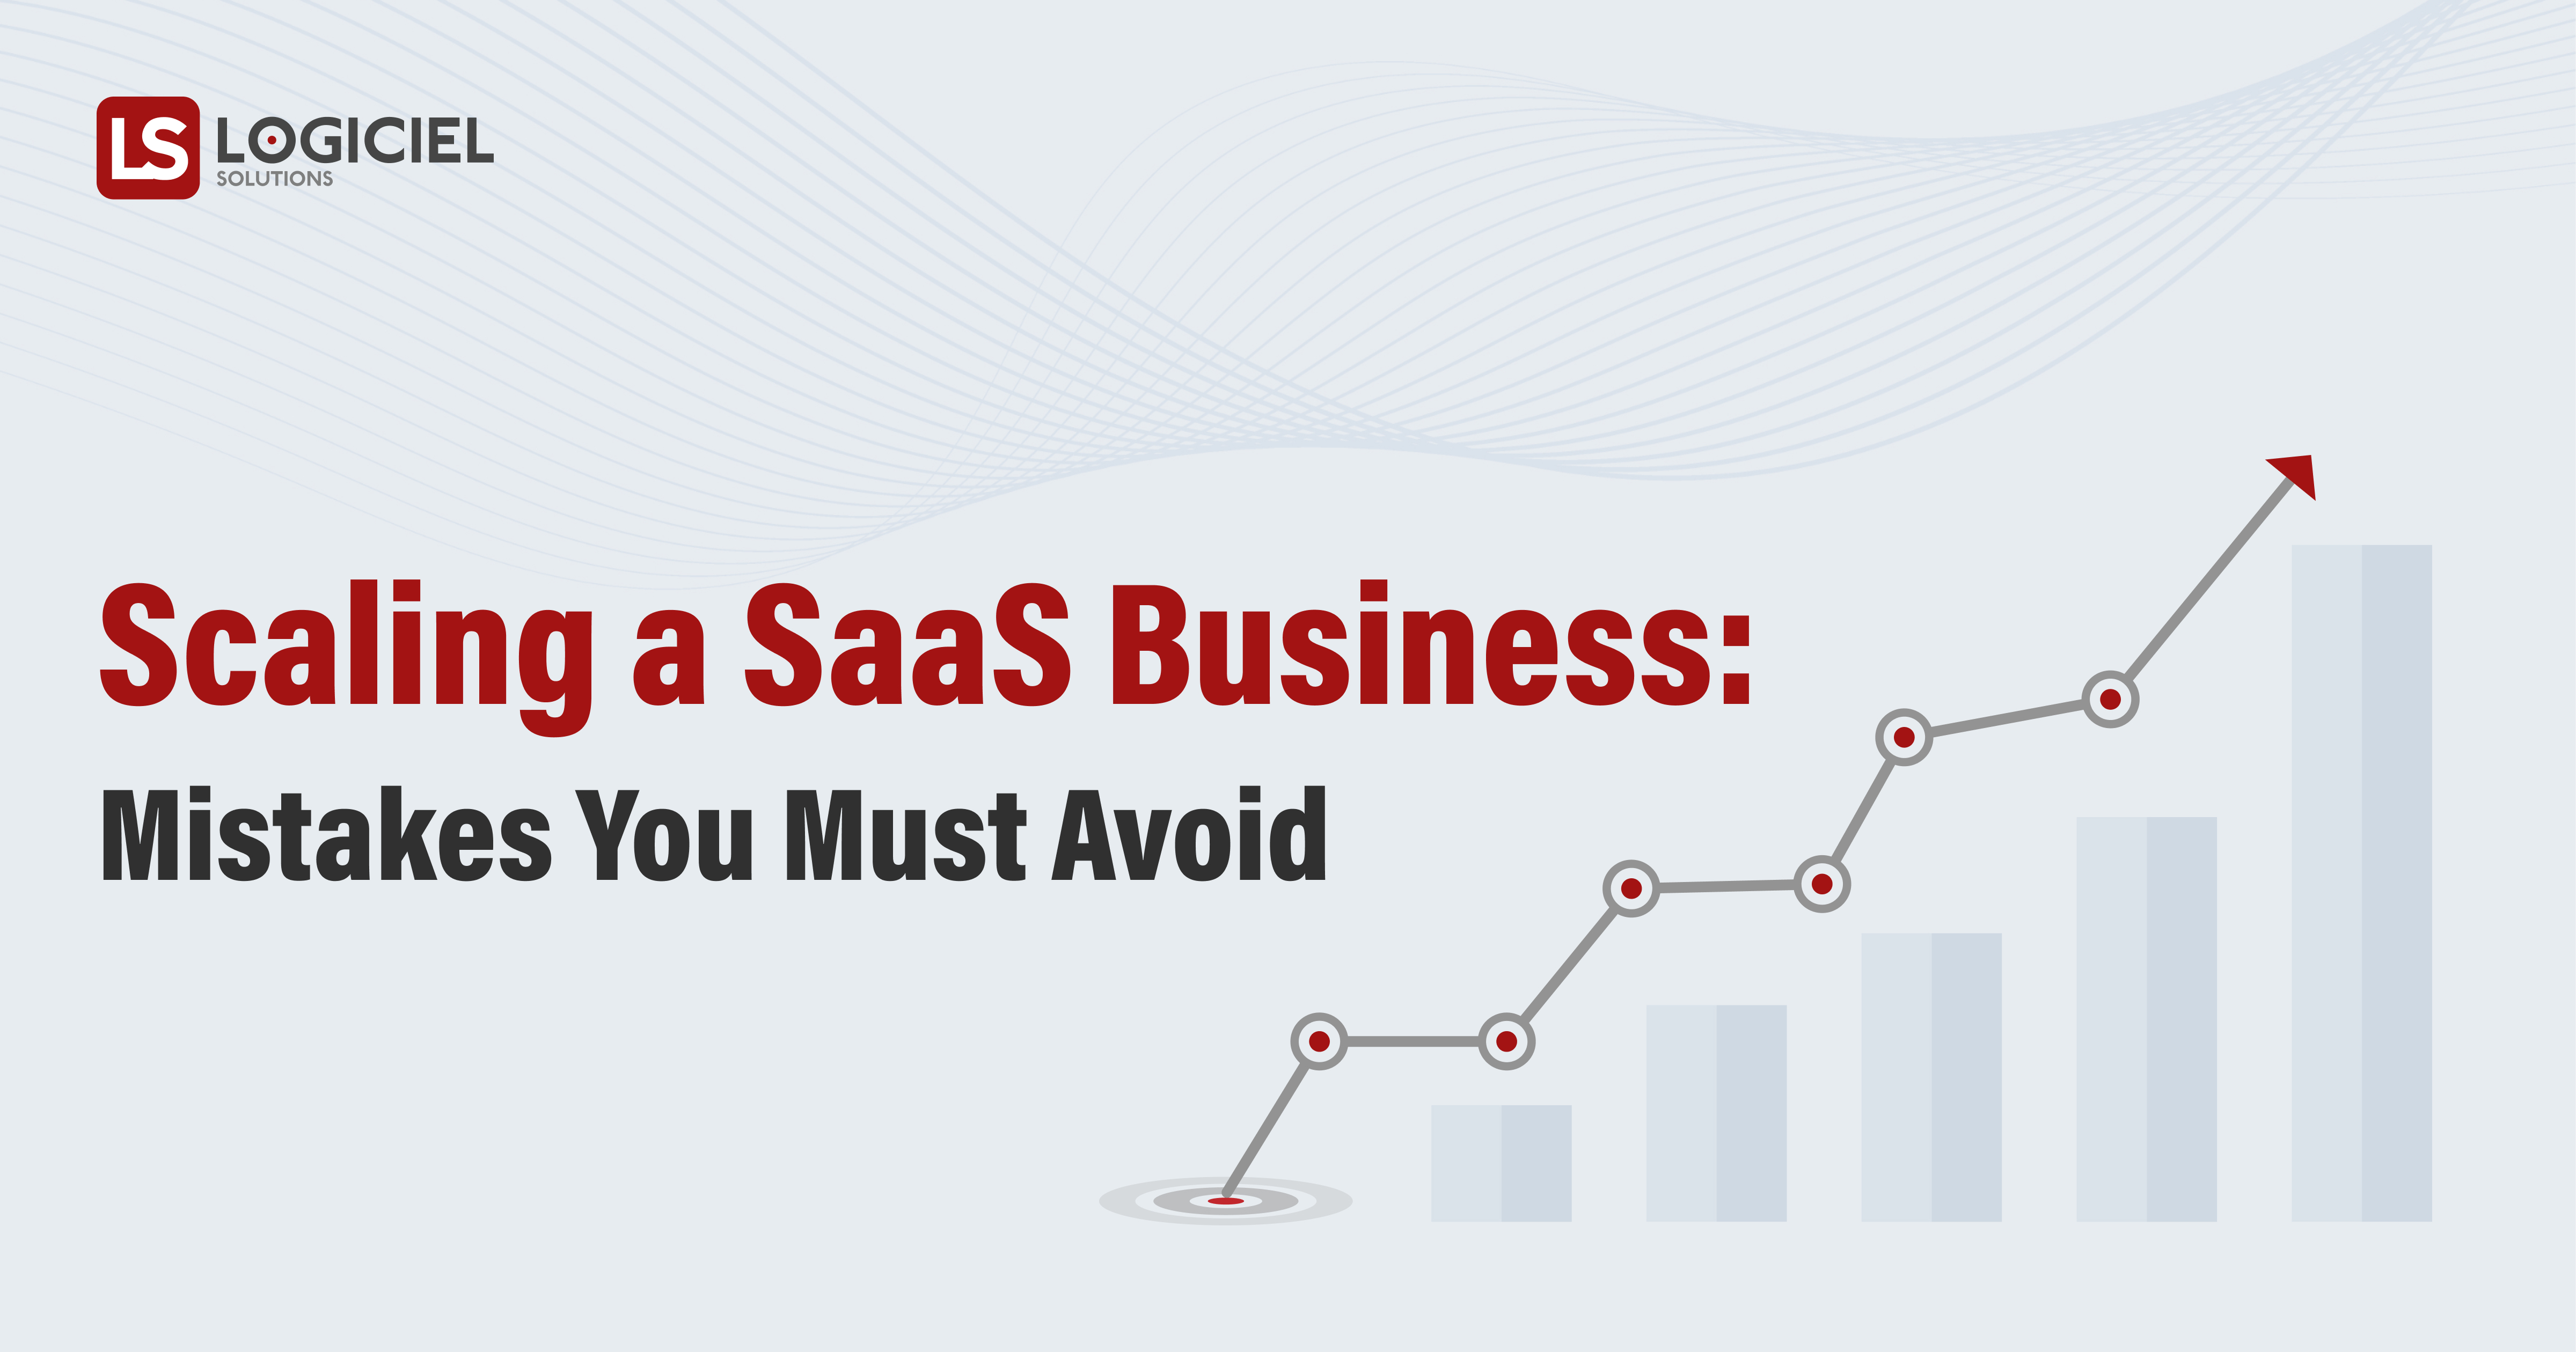 Scaling a SaaS Business: Mistakes You Must Avoid